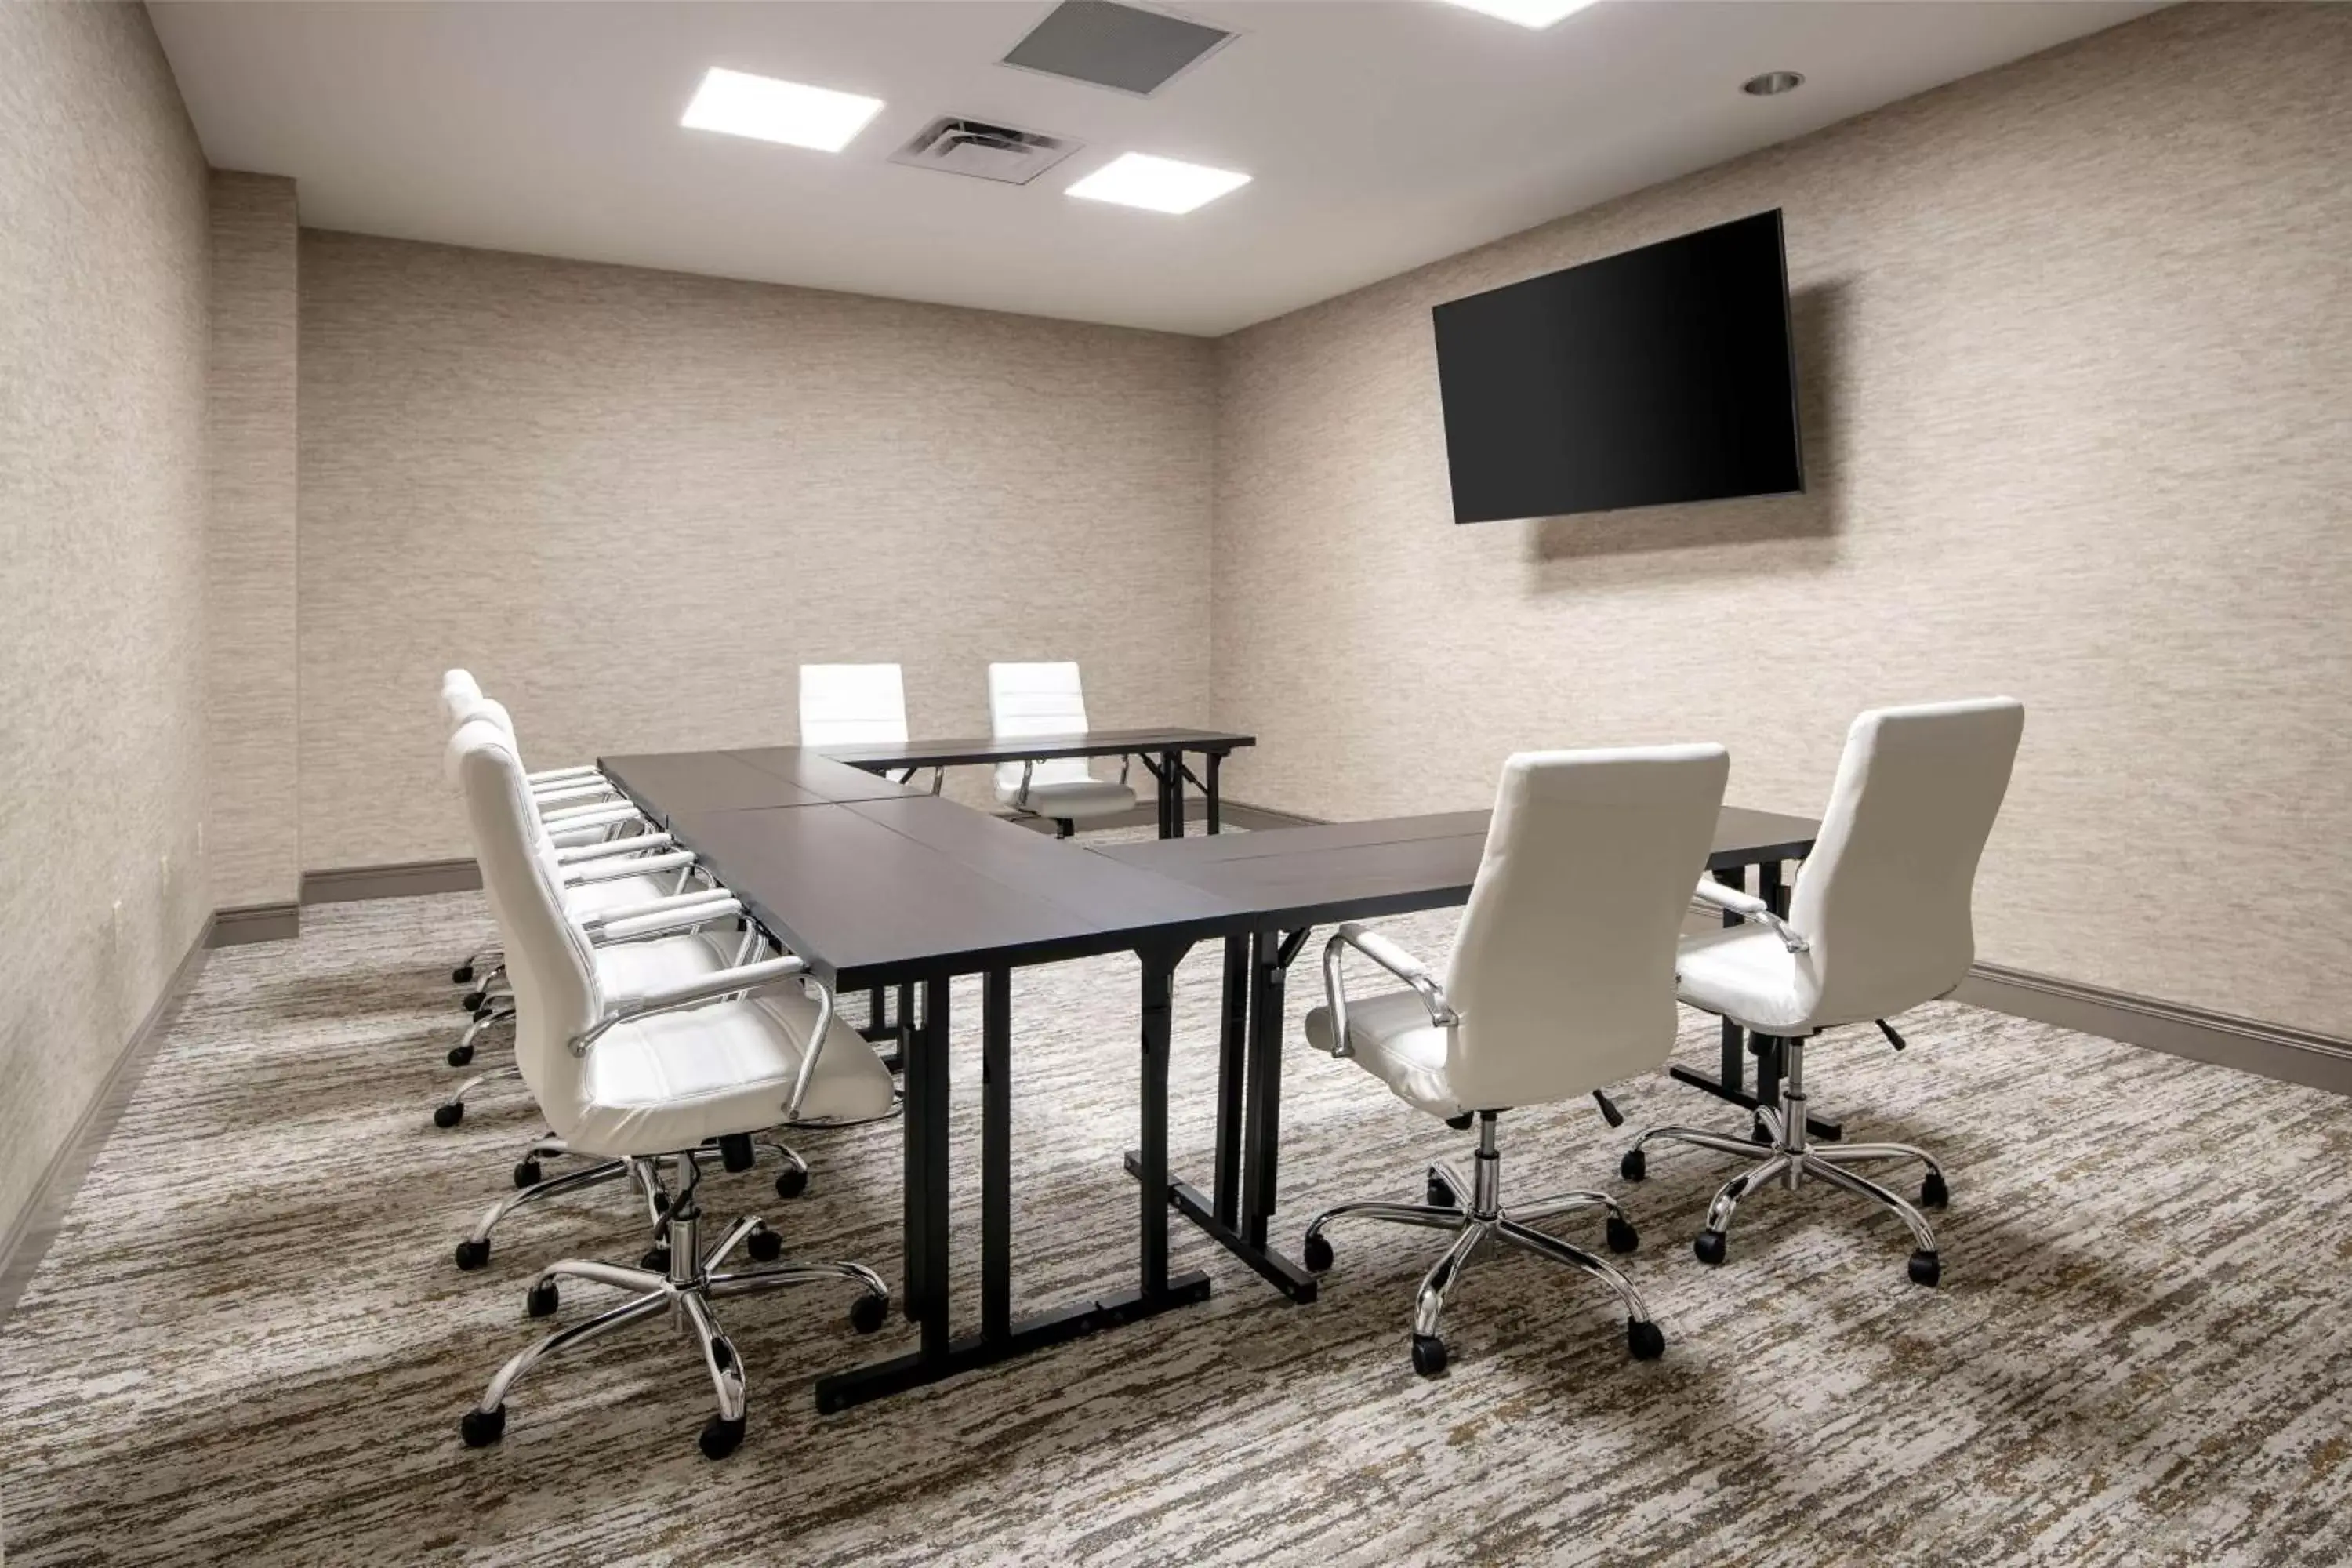 Meeting/conference room in Hilton Dallas Southlake Town Square